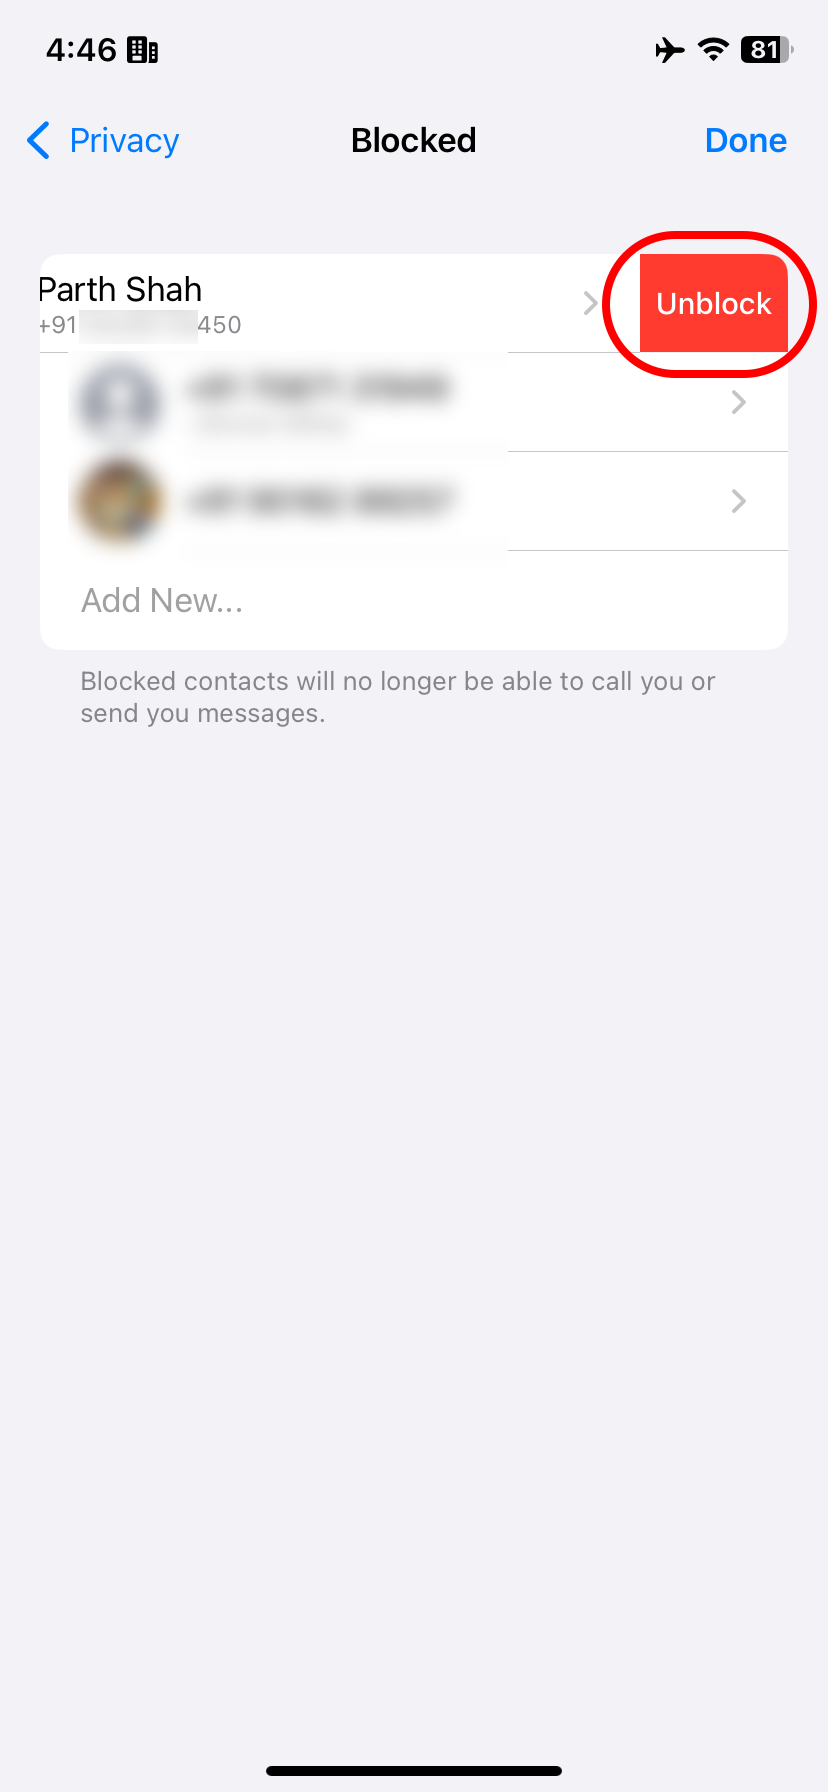 Accessing blocked contacts on WhatsApp for iOS